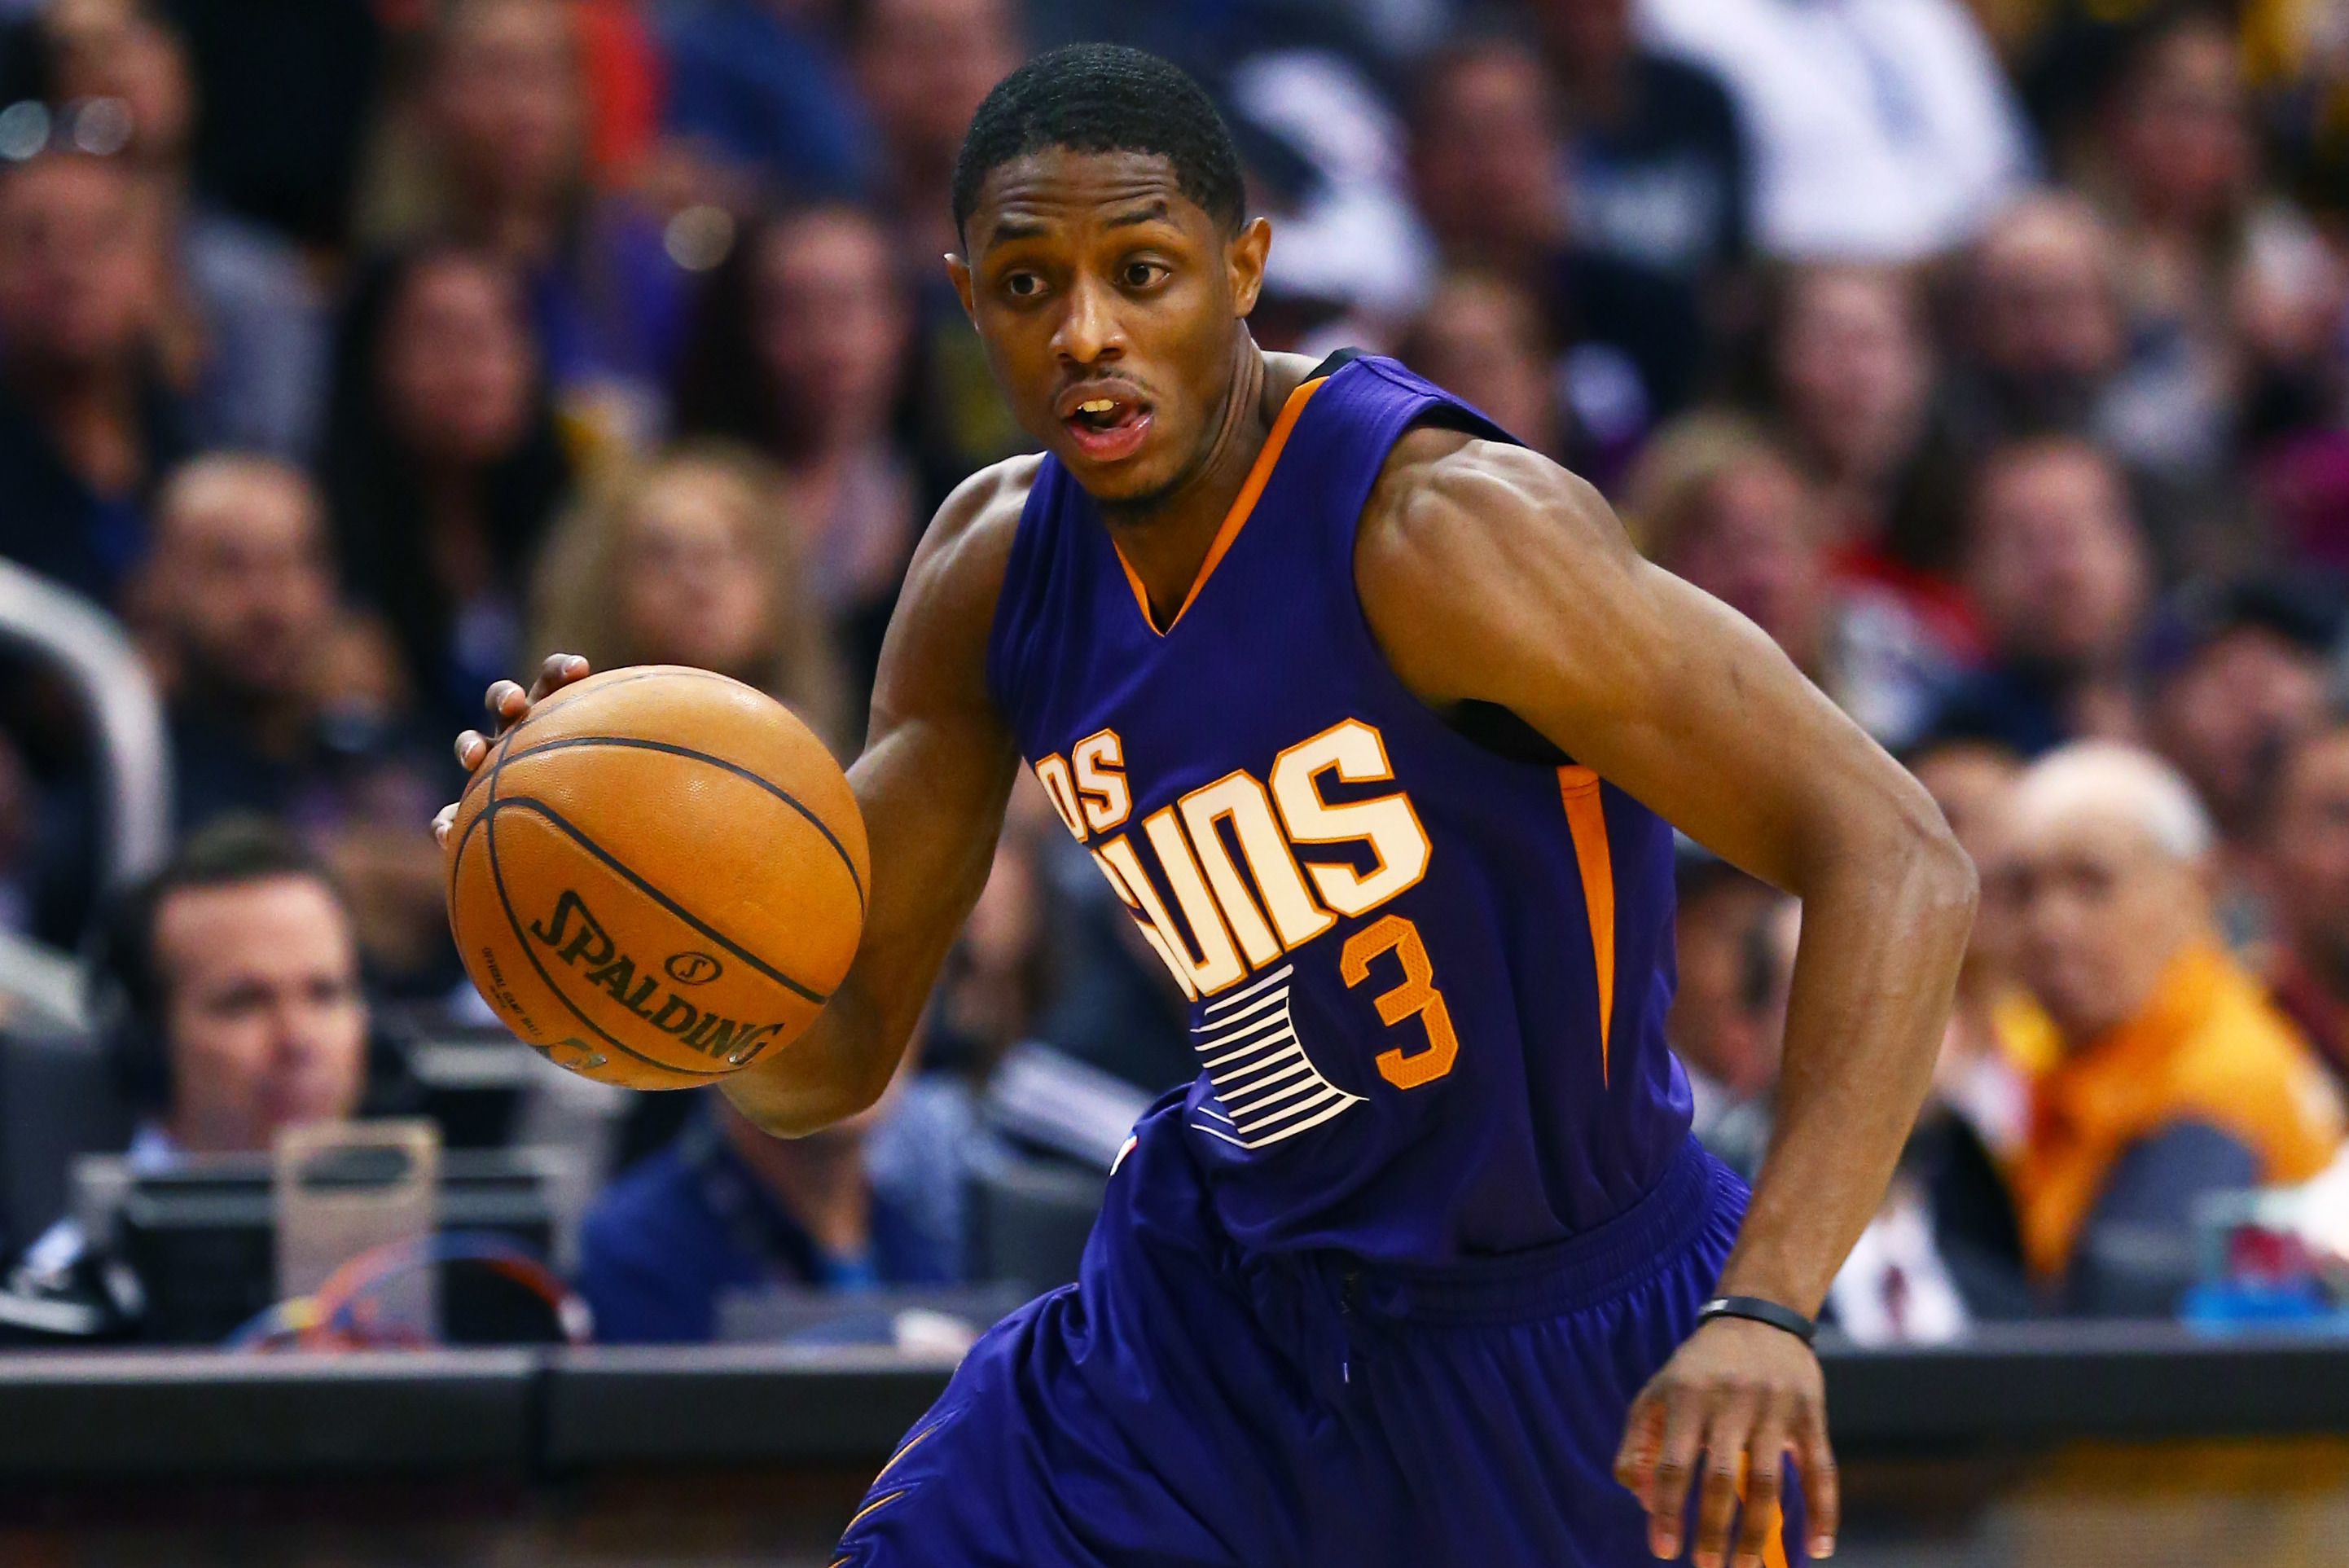 Bleacher Report - Brandon Knight's Wikipedia page was updated to